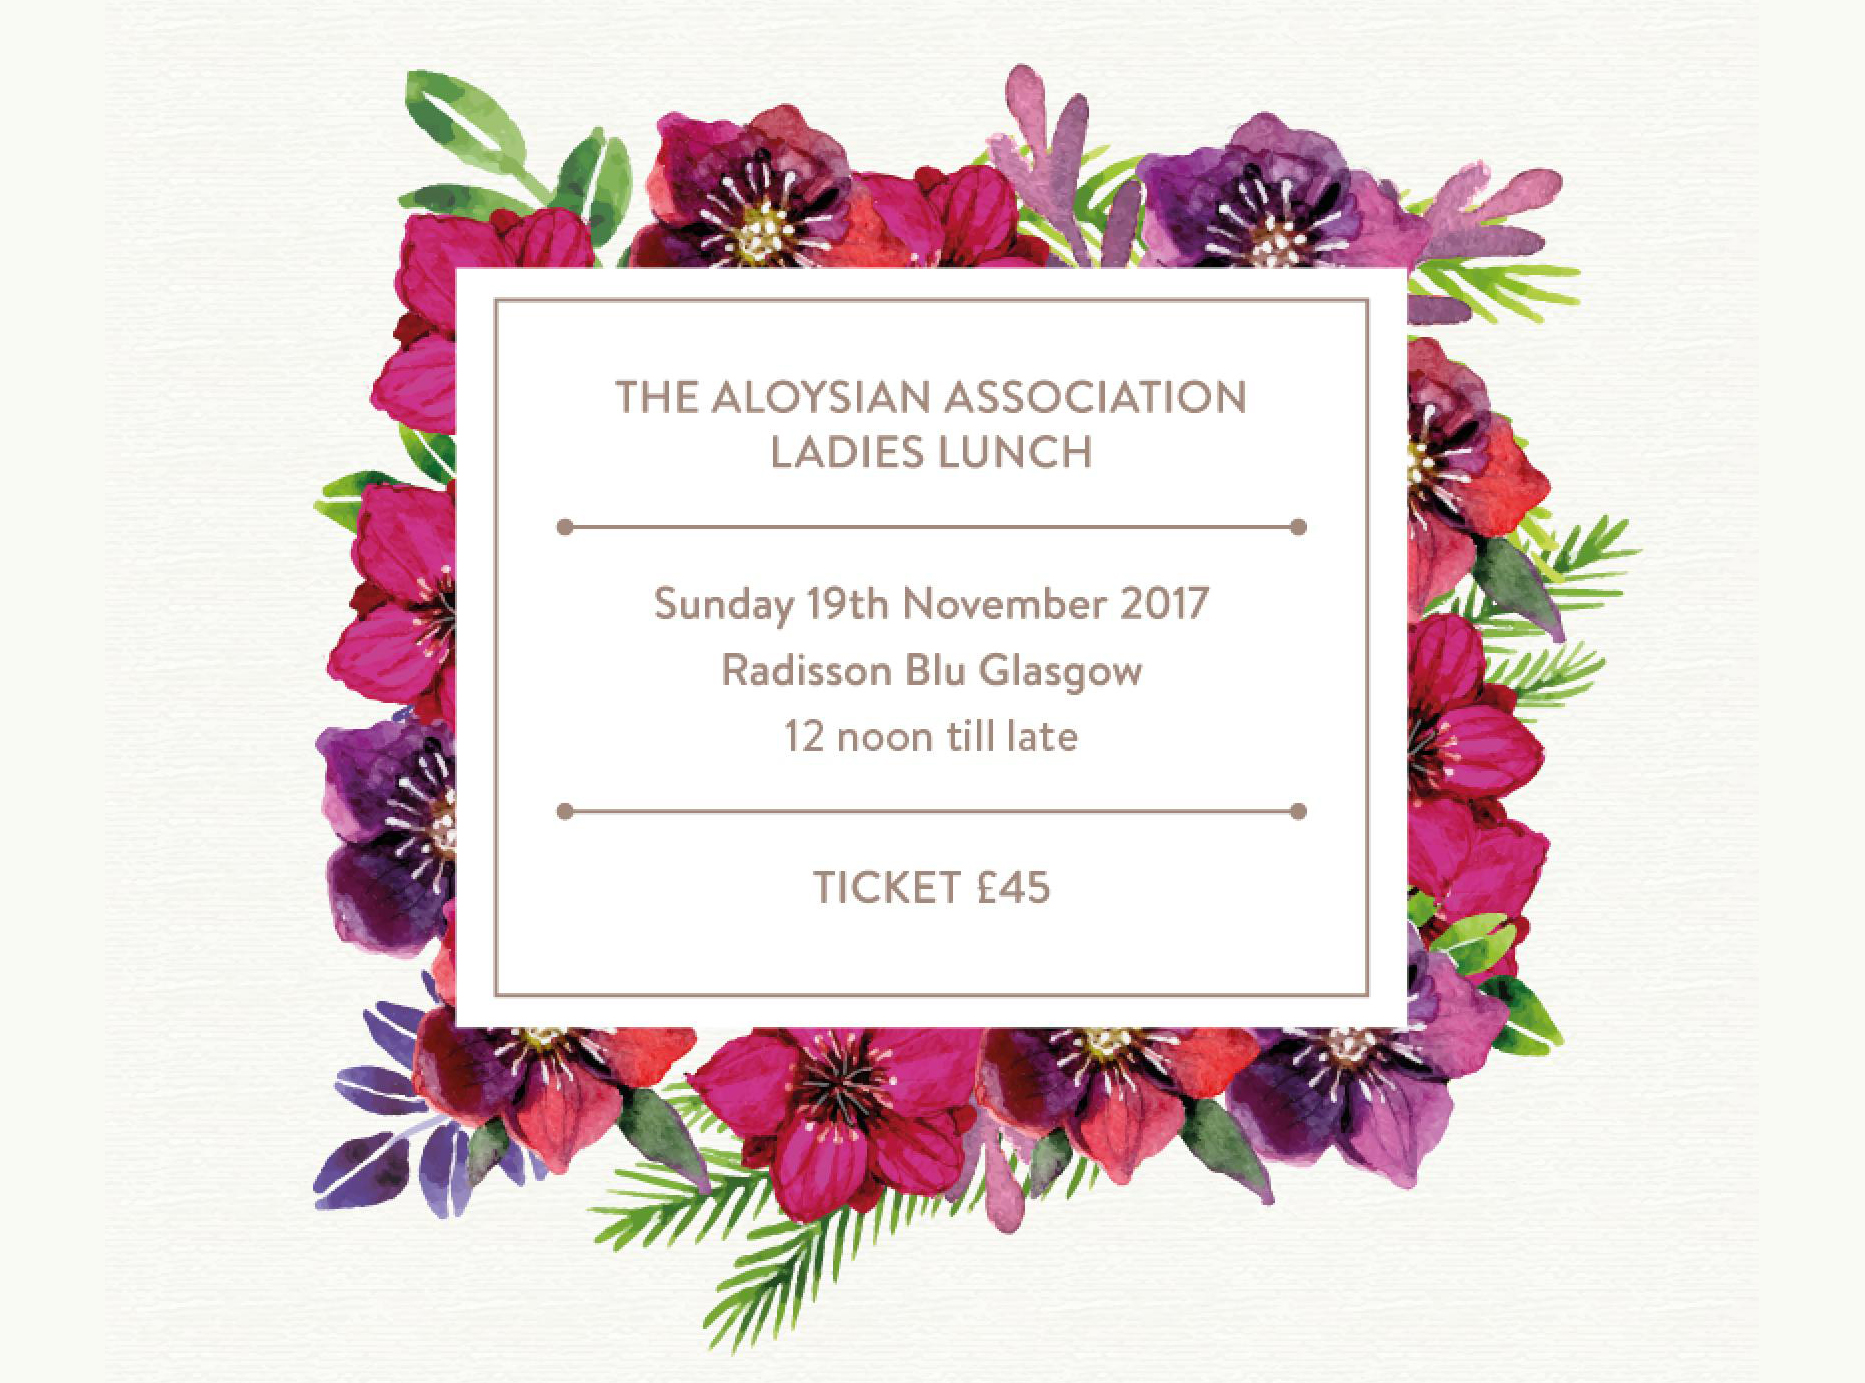 Aloysian Ladies Lunch Tickets Now on Sale